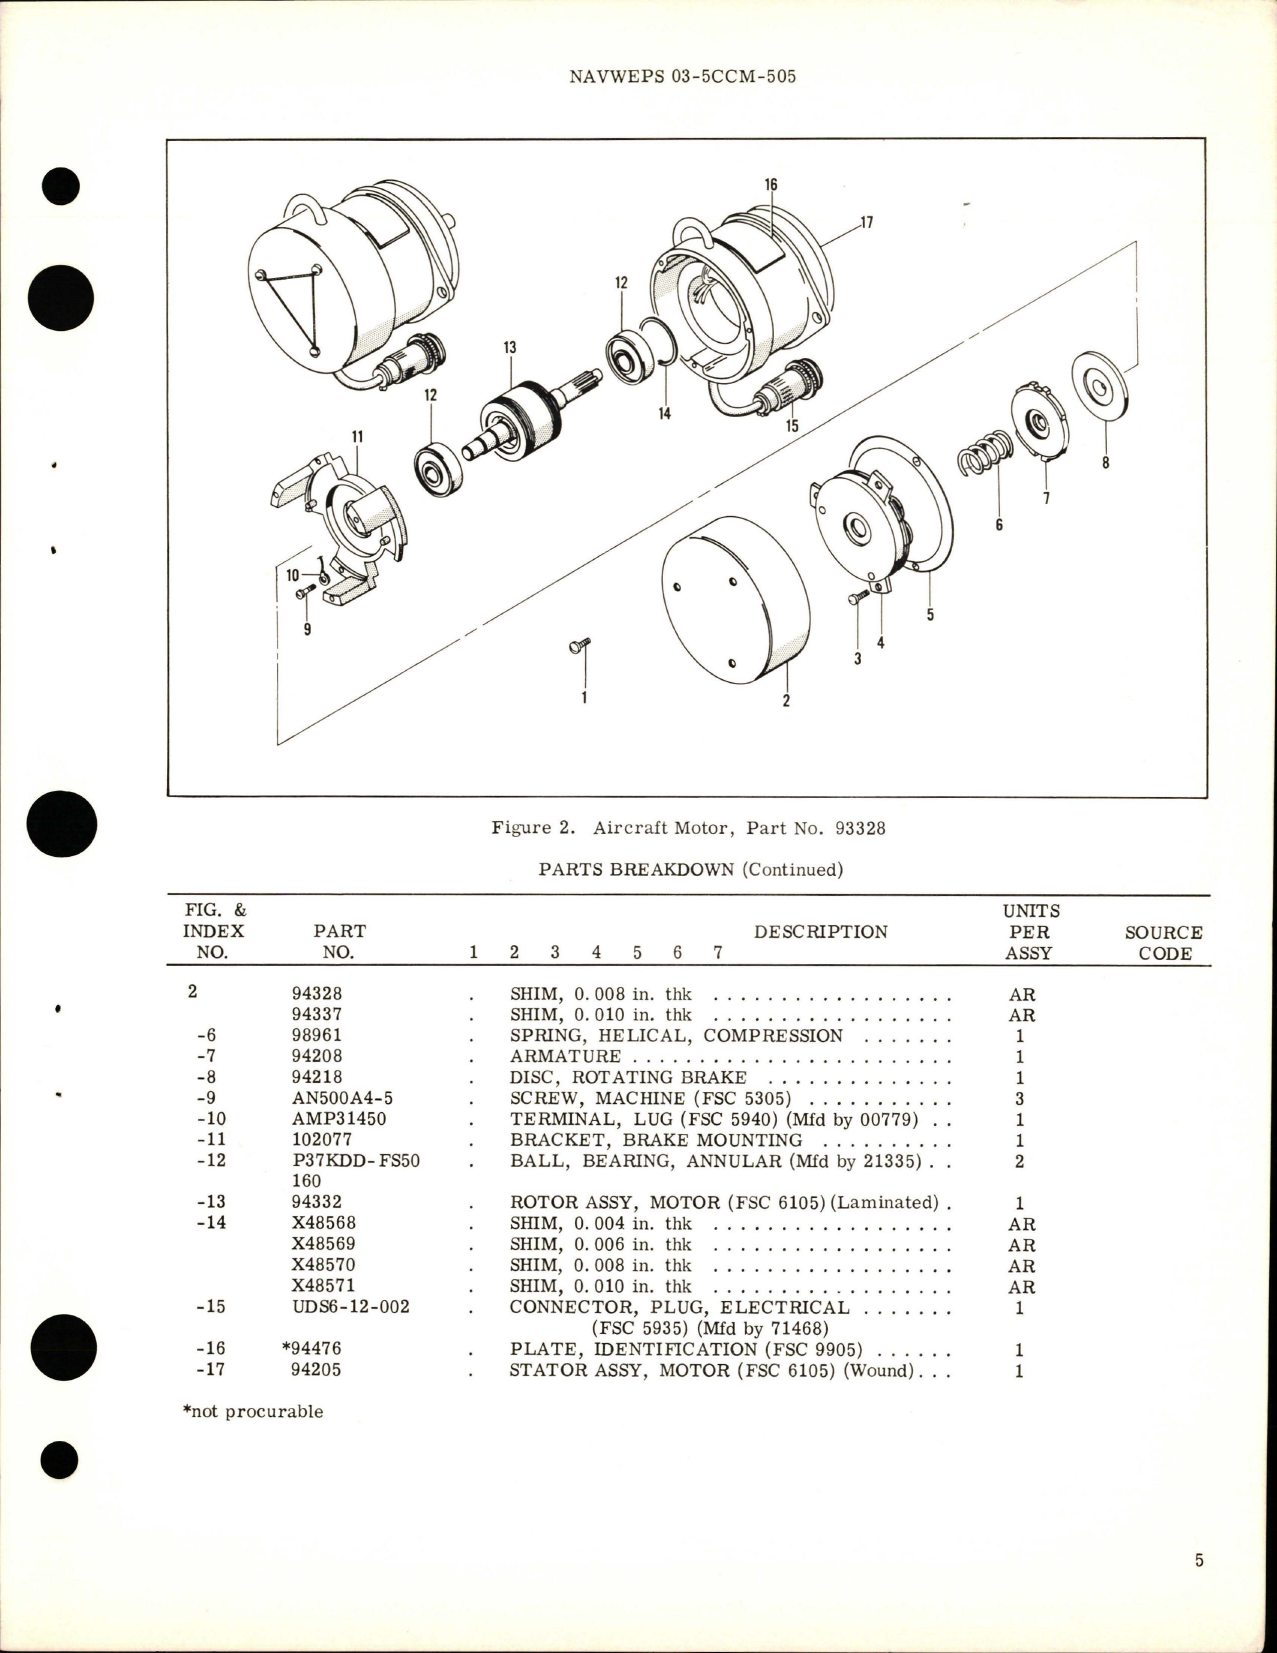 Sample page 5 from AirCorps Library document: Overhaul Instructions with Parts Breakdown for Aircraft Motors - Parts 93328, 400712, and 404343 